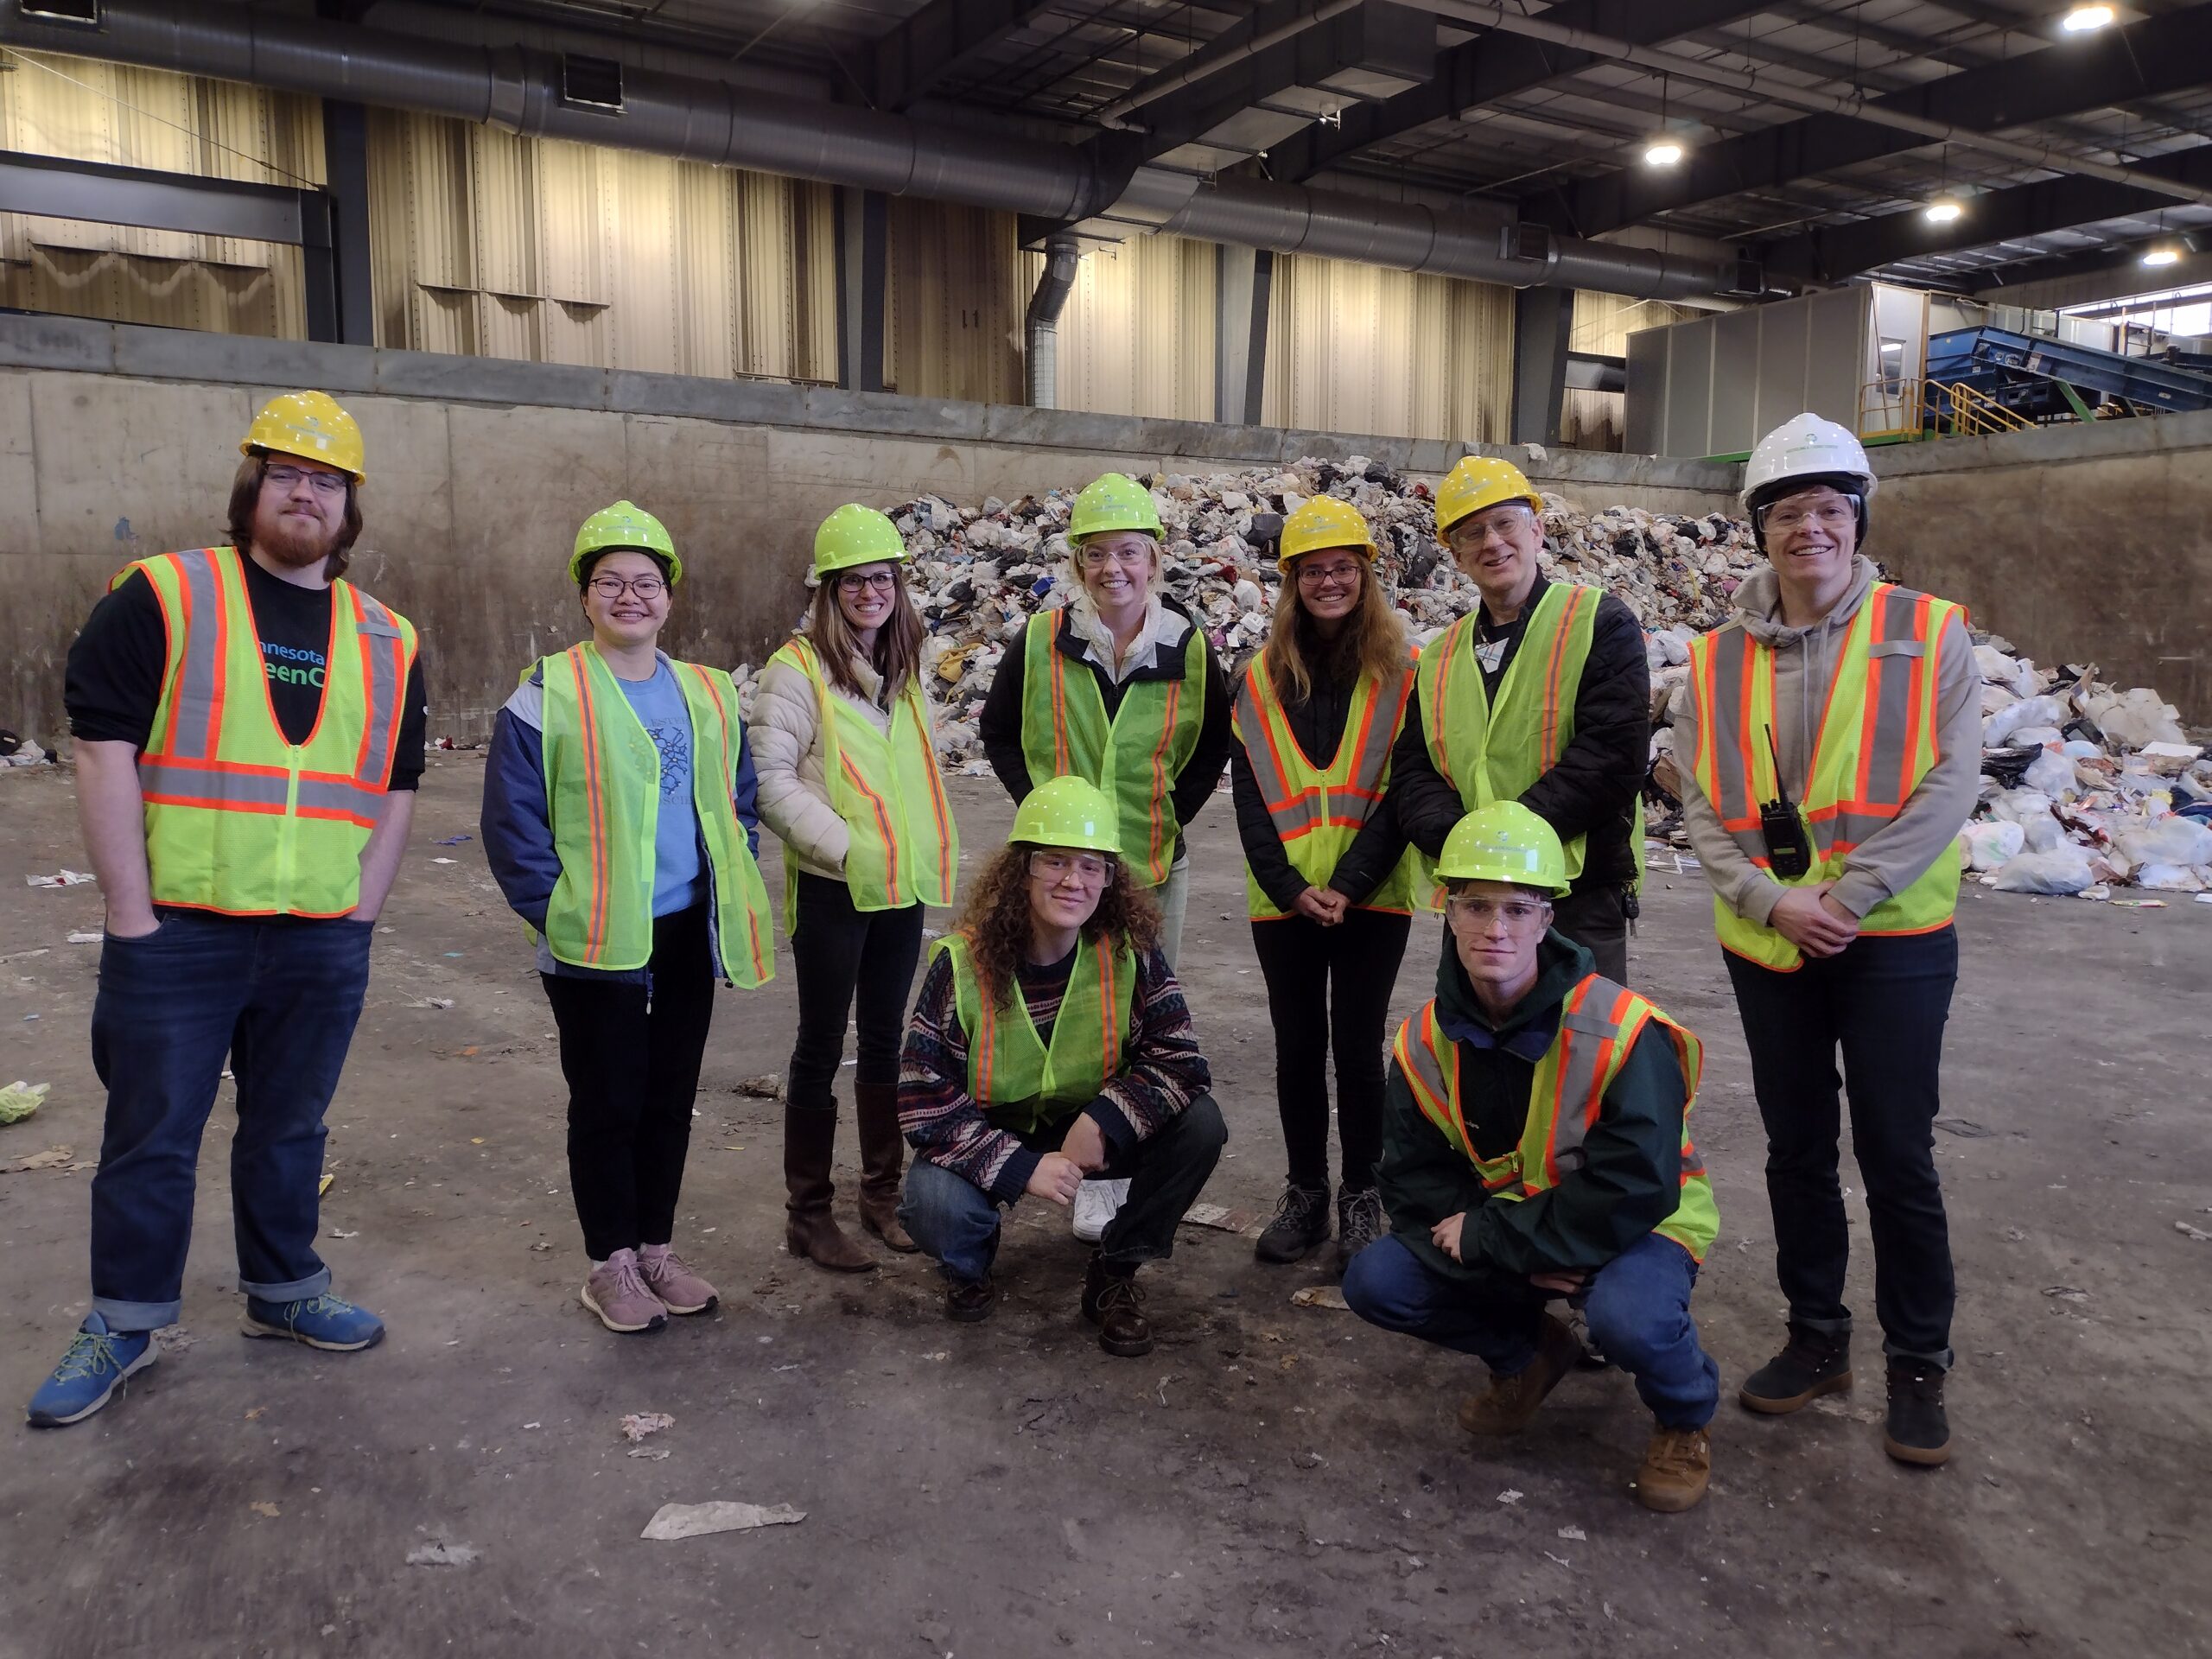 A group of people wearing reflective vests and hard hats pose for a photo at a waste management facility.